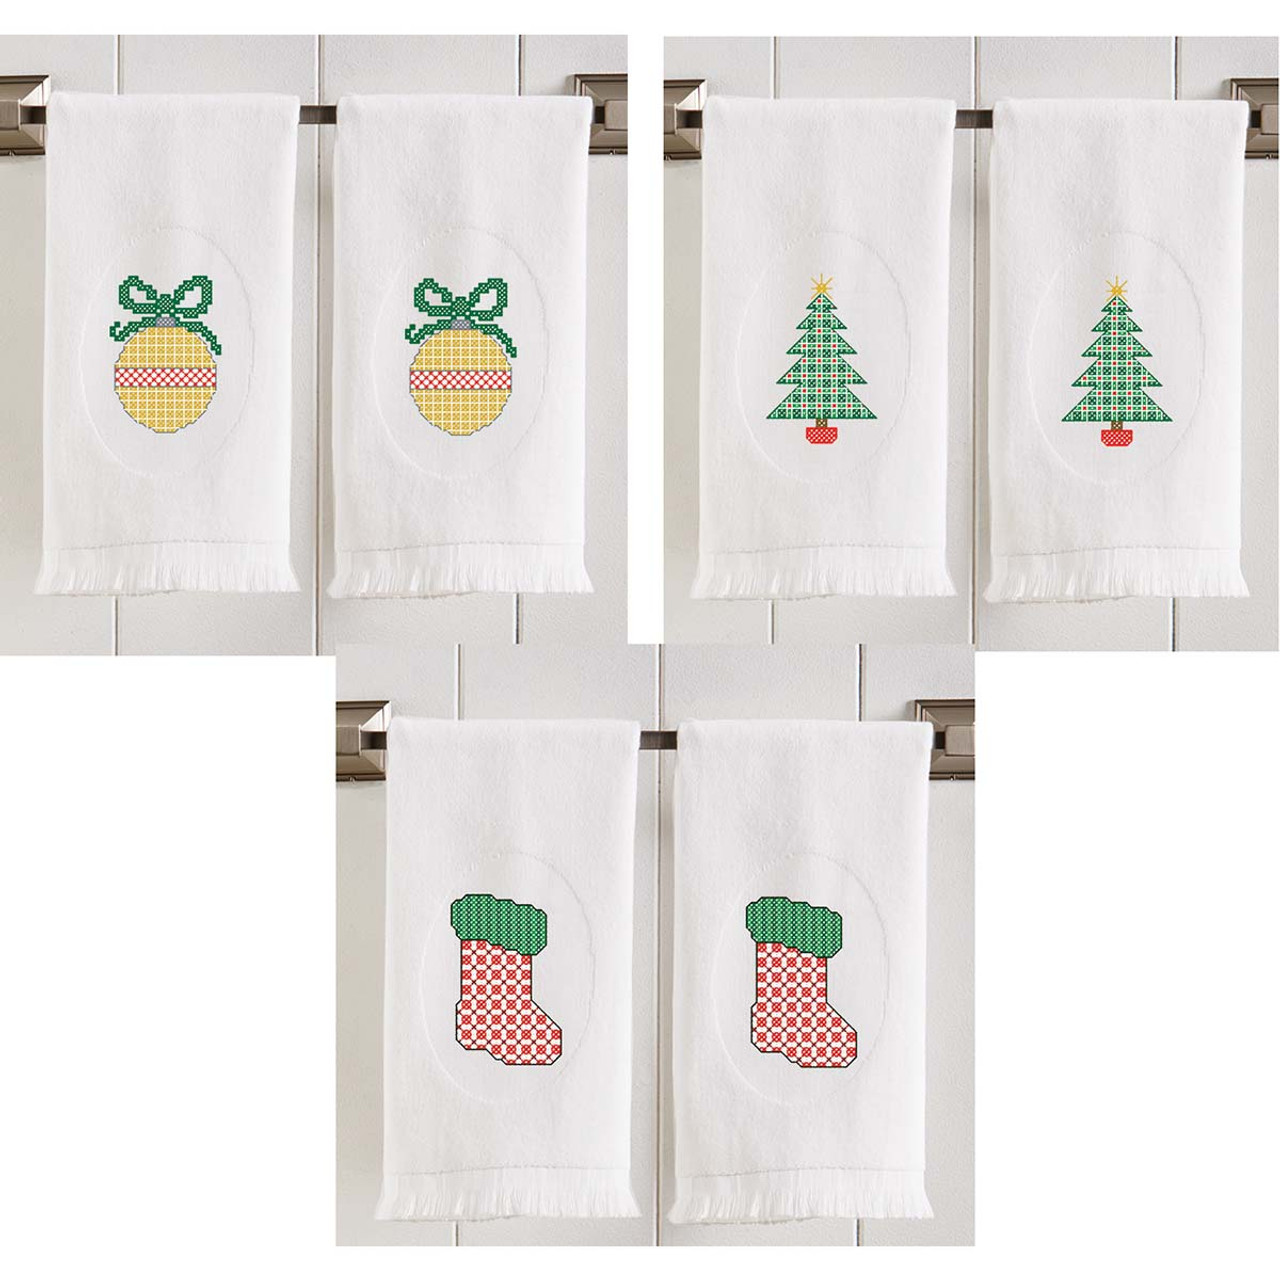 Winter Kitchen Towel Cotton Terry Cloth Embroidered Let It 